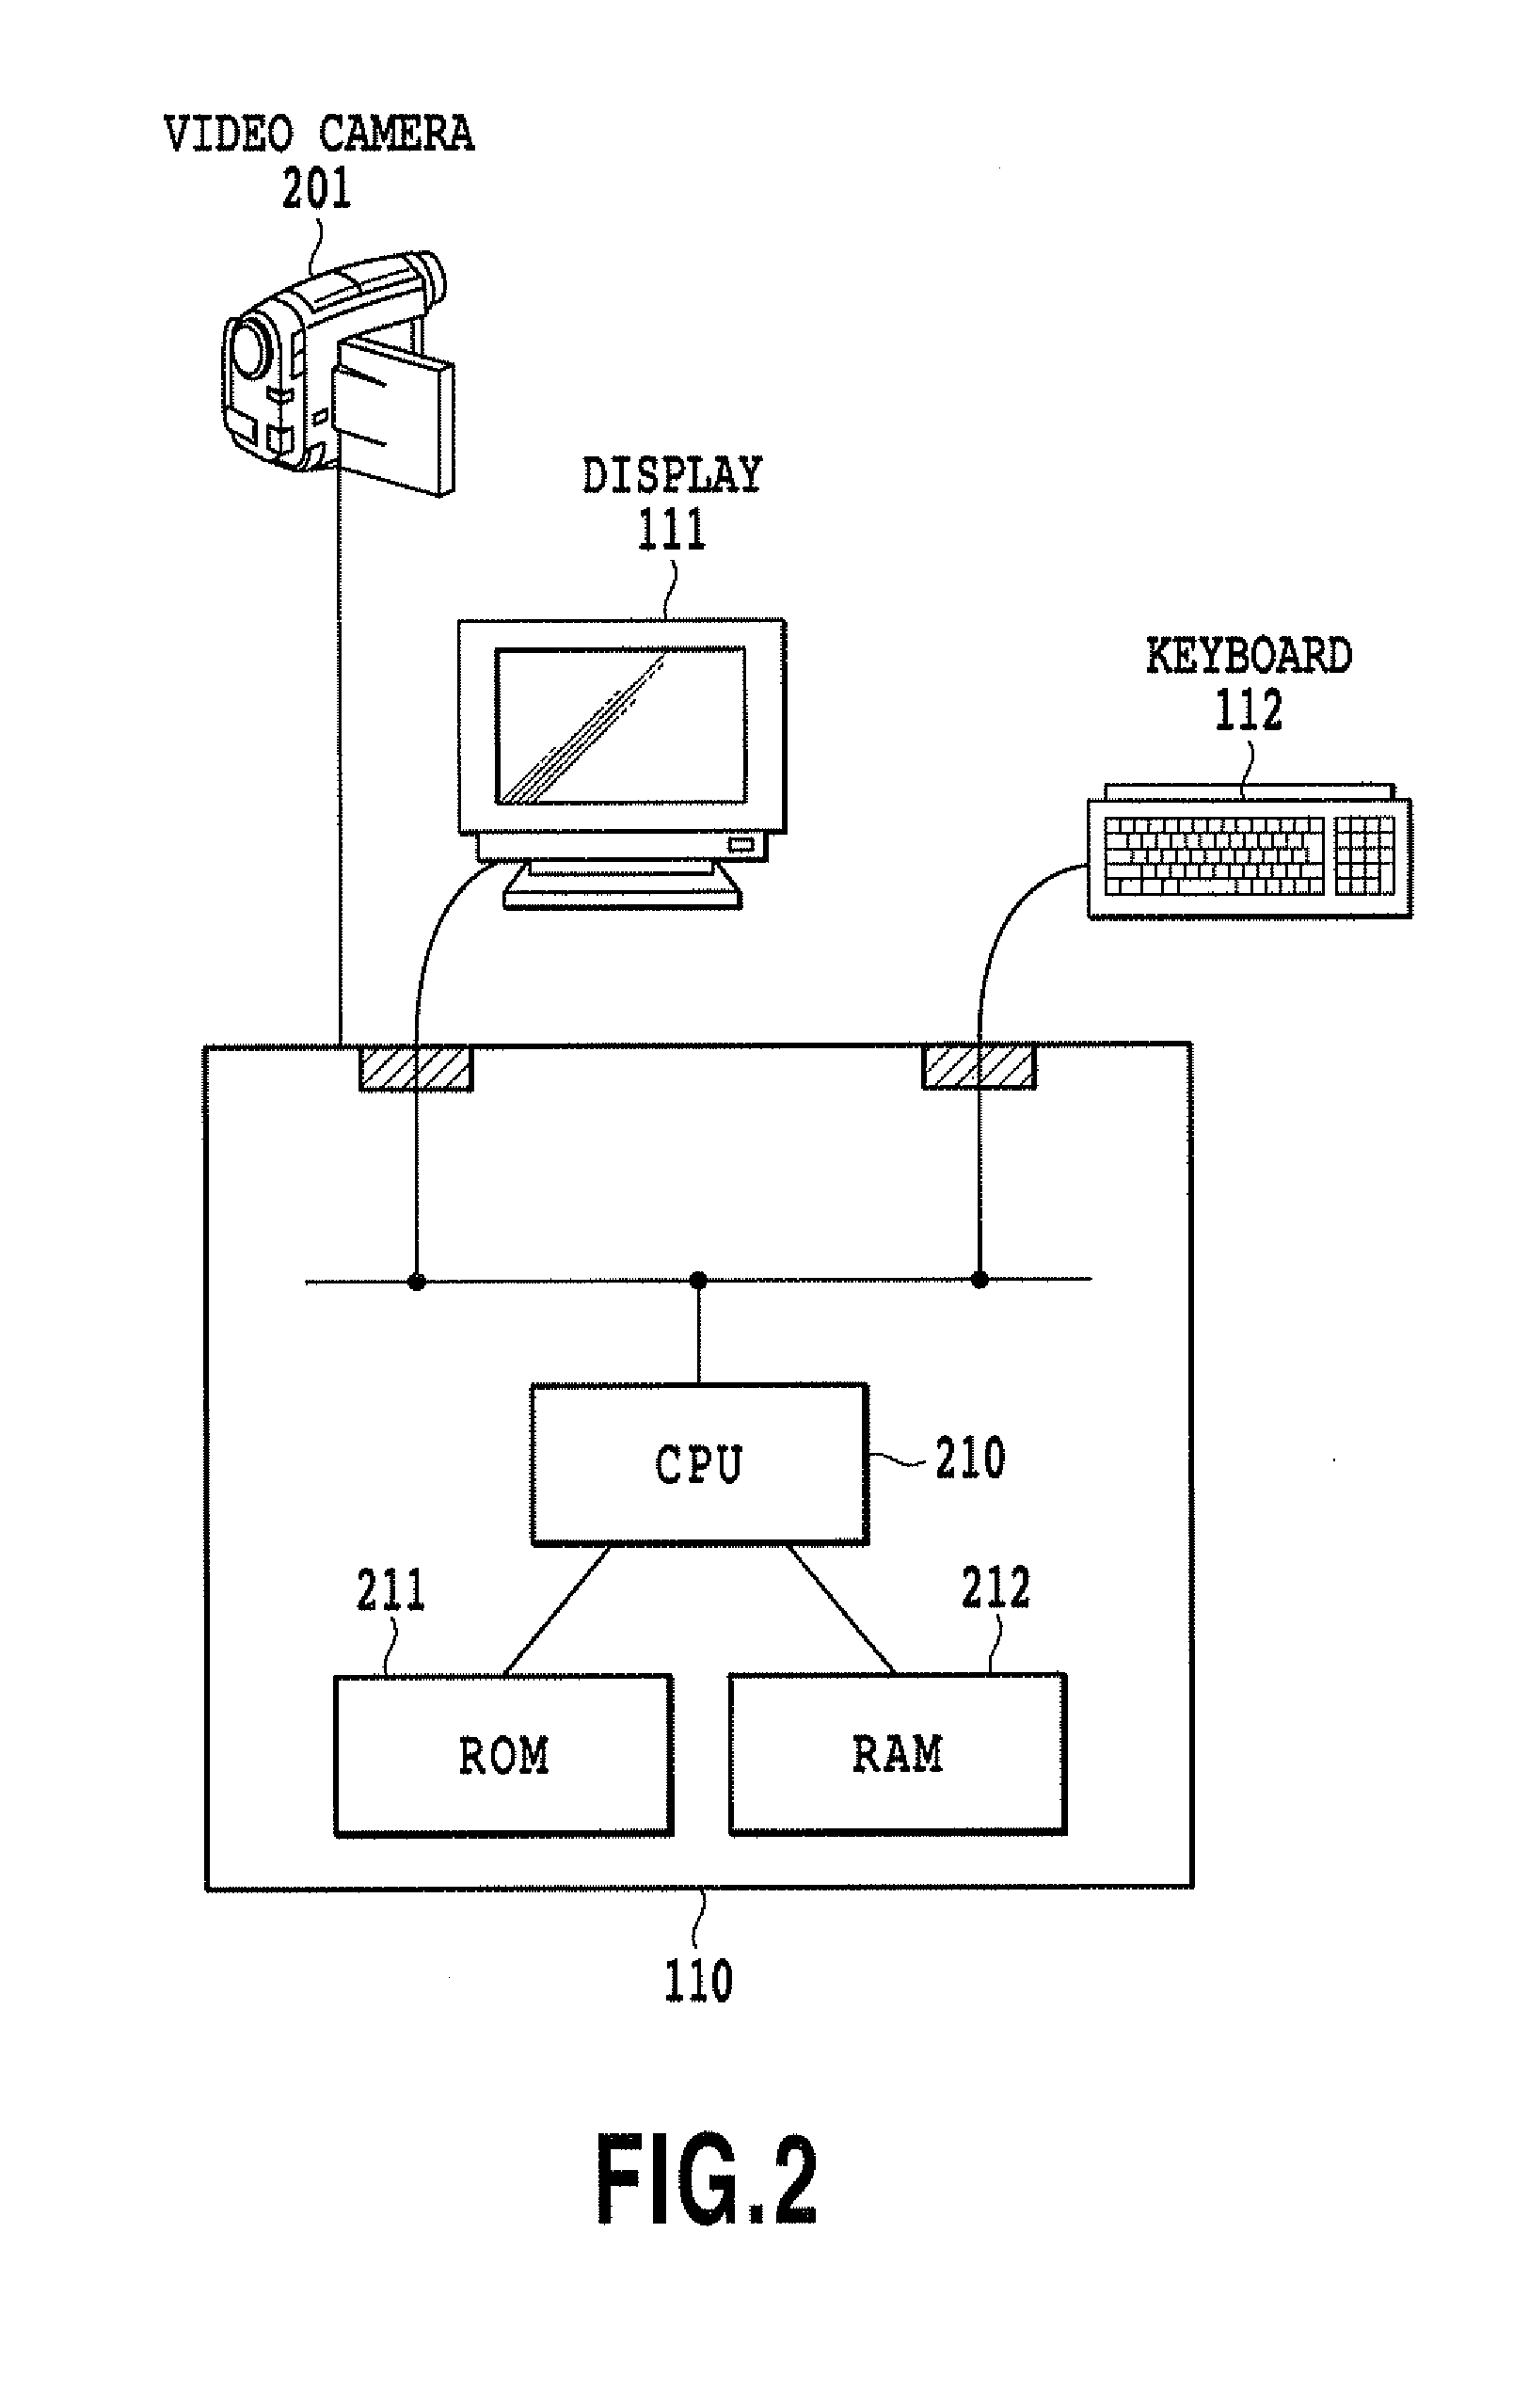 Image recognition apparatus, and operation determination method and program therefor